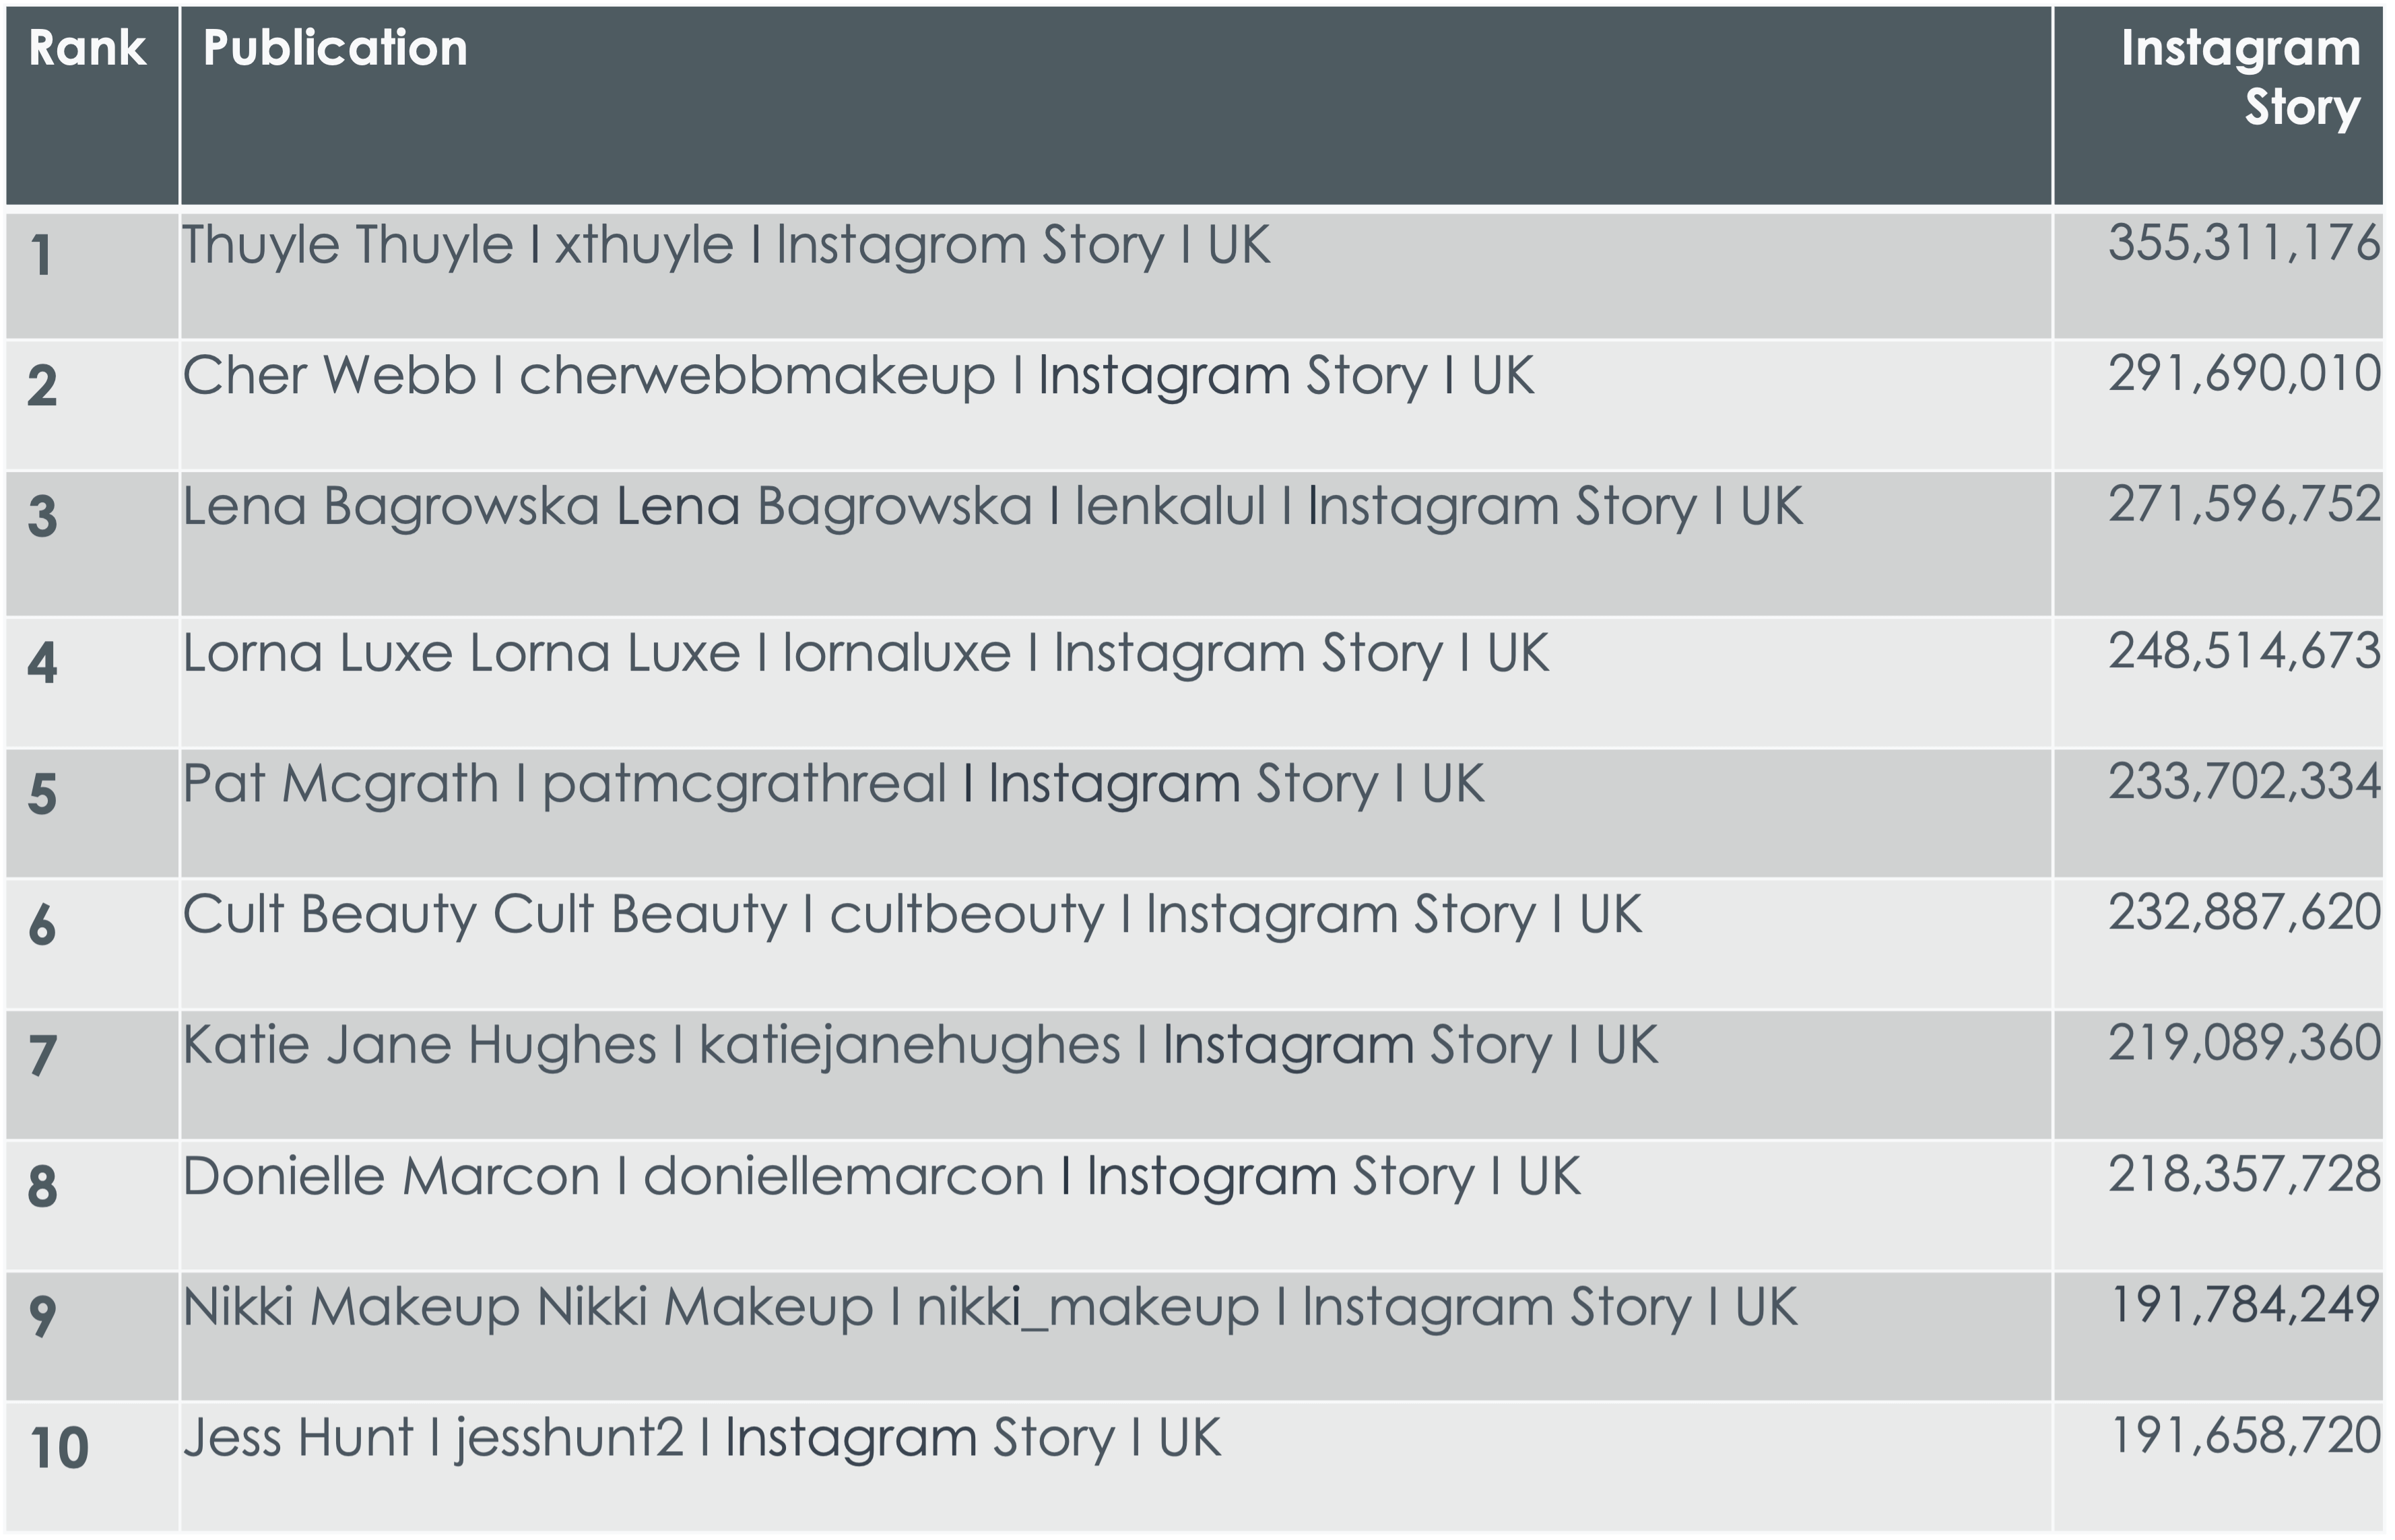 Q1 2022 - The top 10 UK beauty influencers by Instagram Stories reach